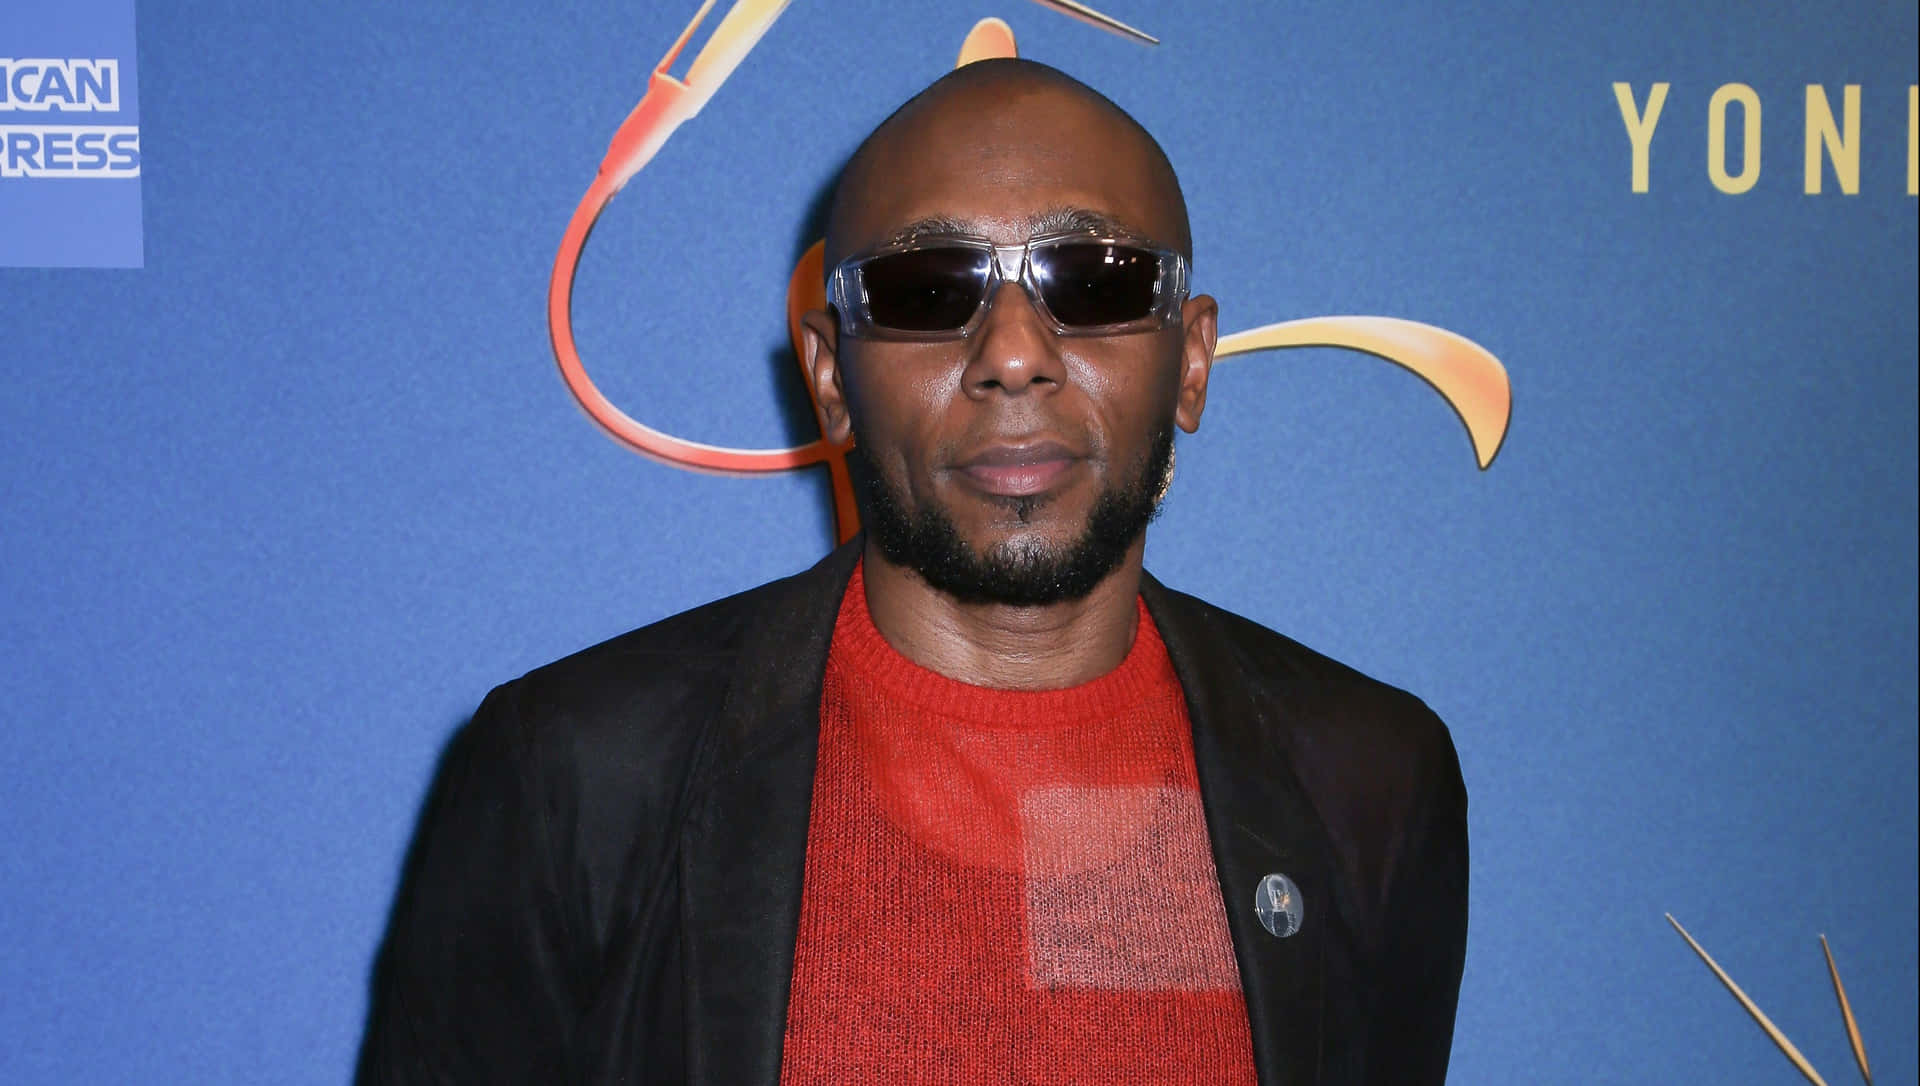 Download Yasiin Bey In A Promotional Photo Shoot Wallpaper